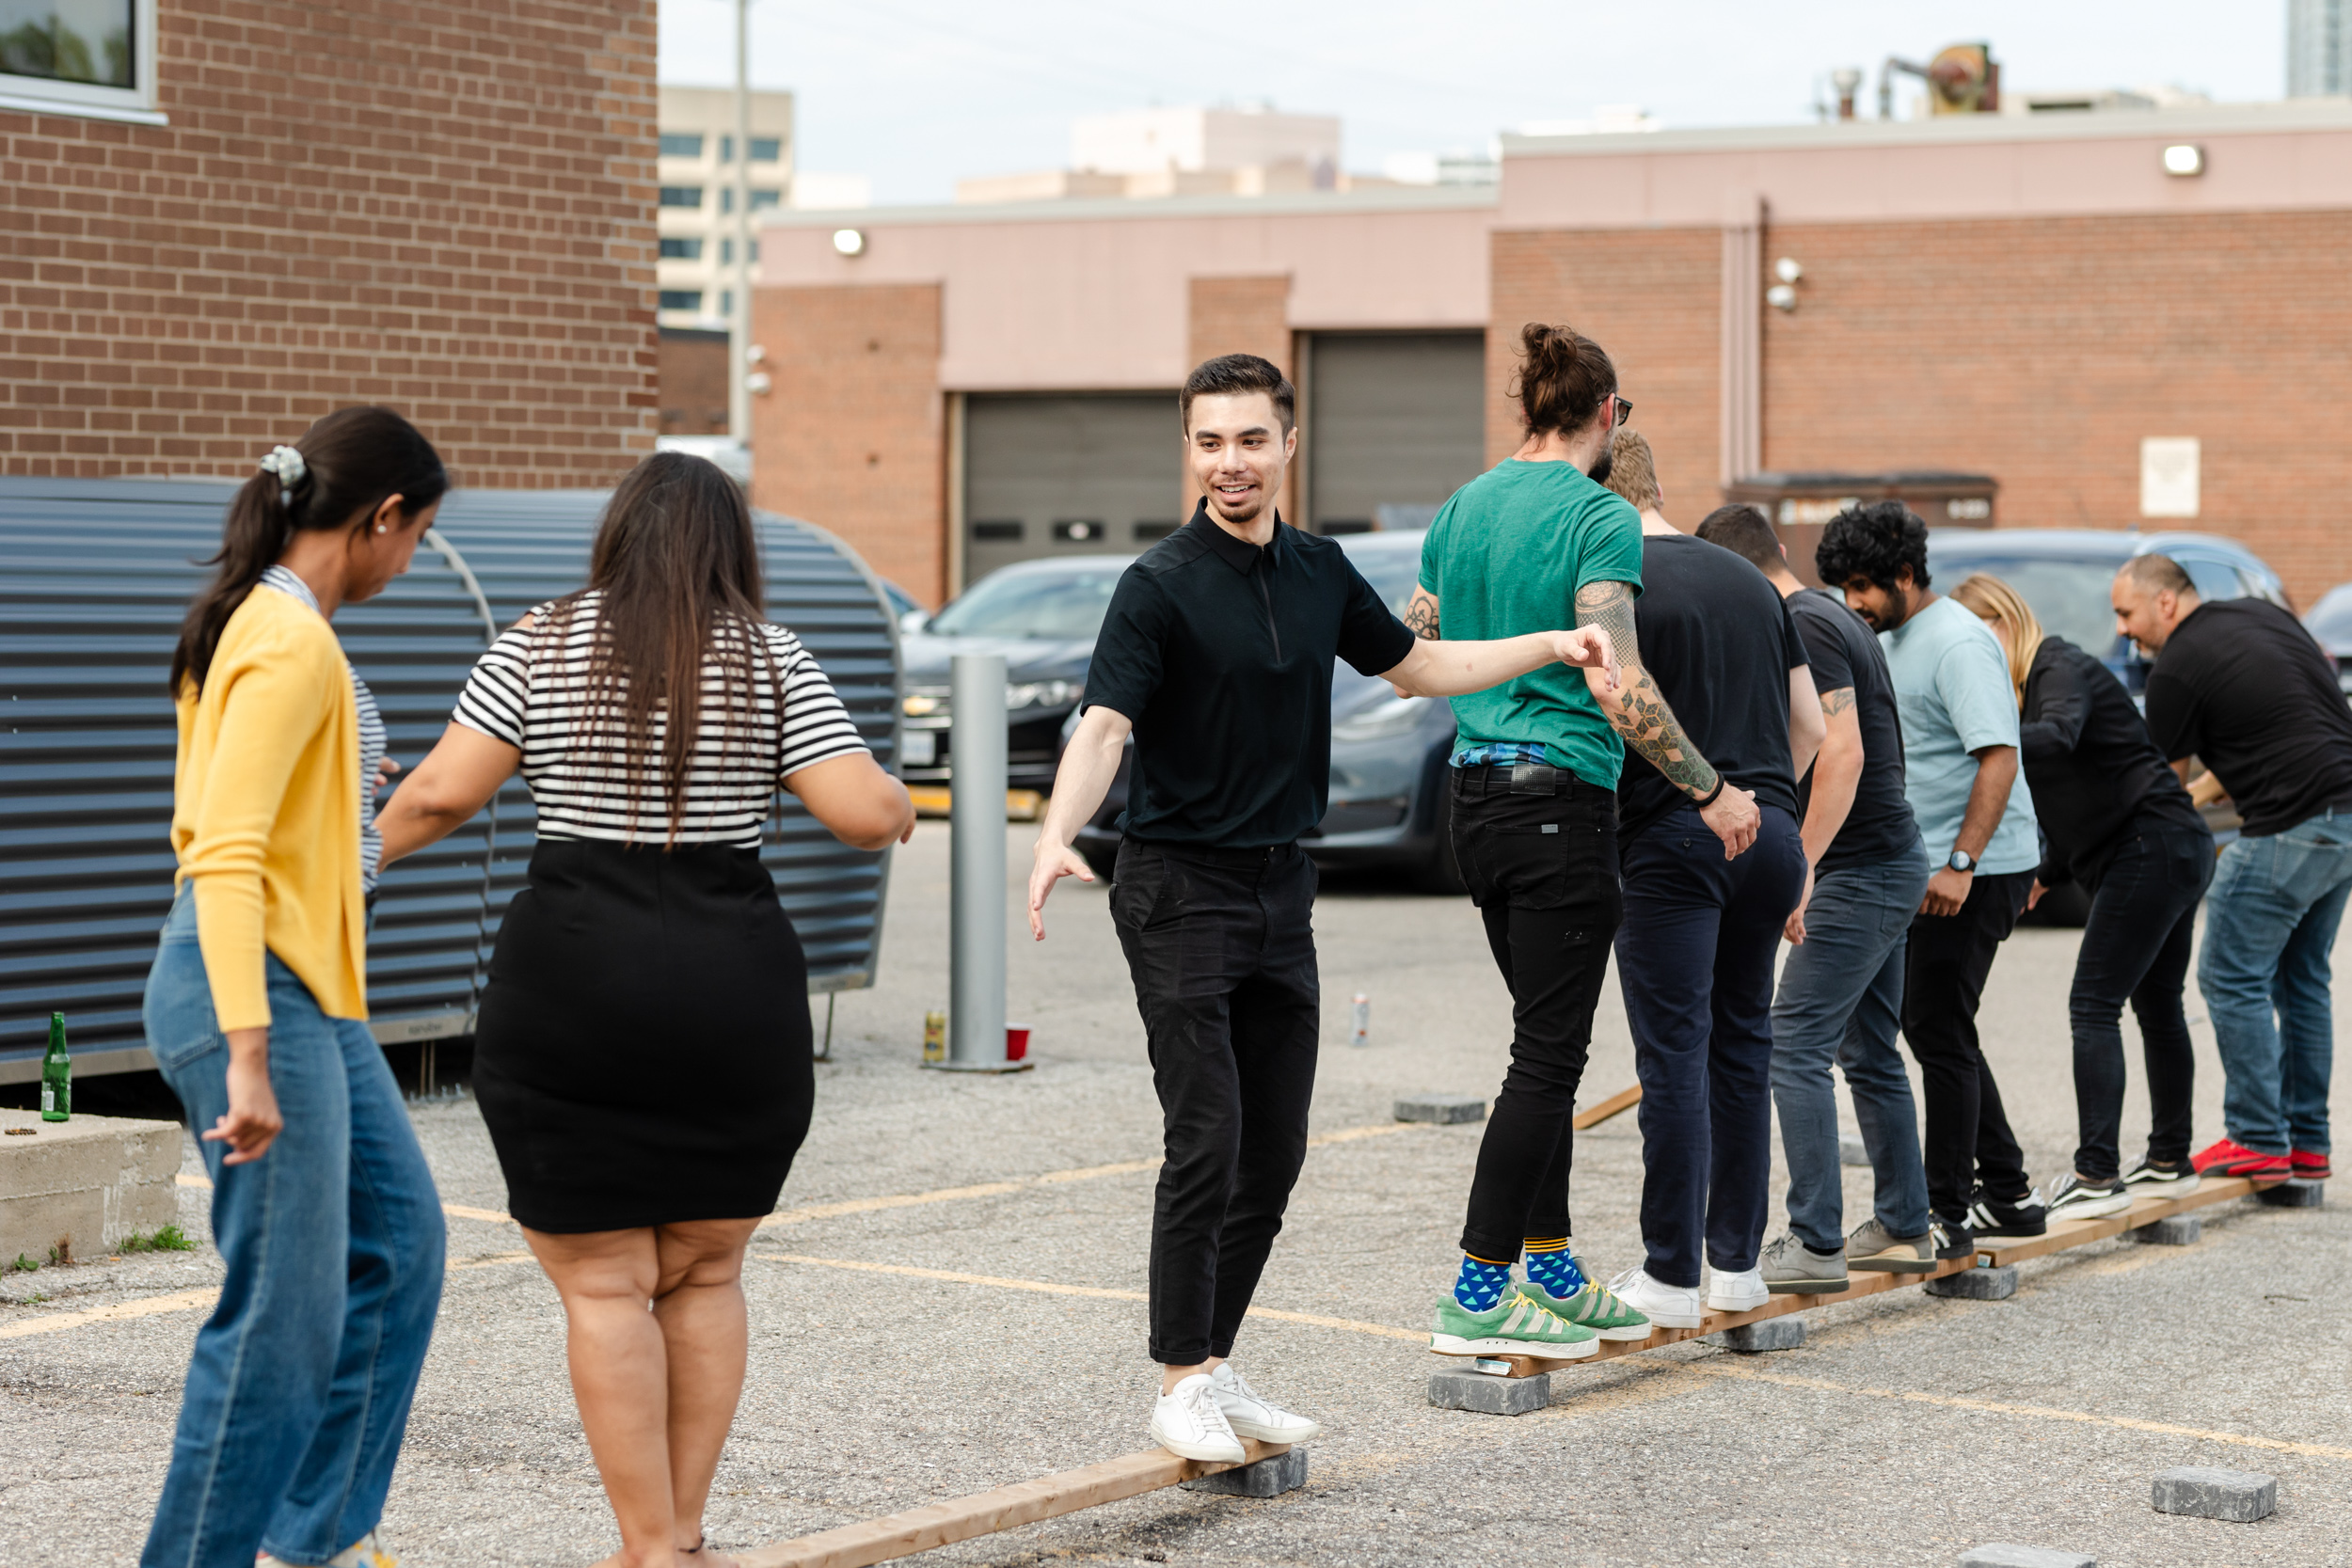 A crowd of individuals posing on wooden planks in a parking lot at a social gathering.